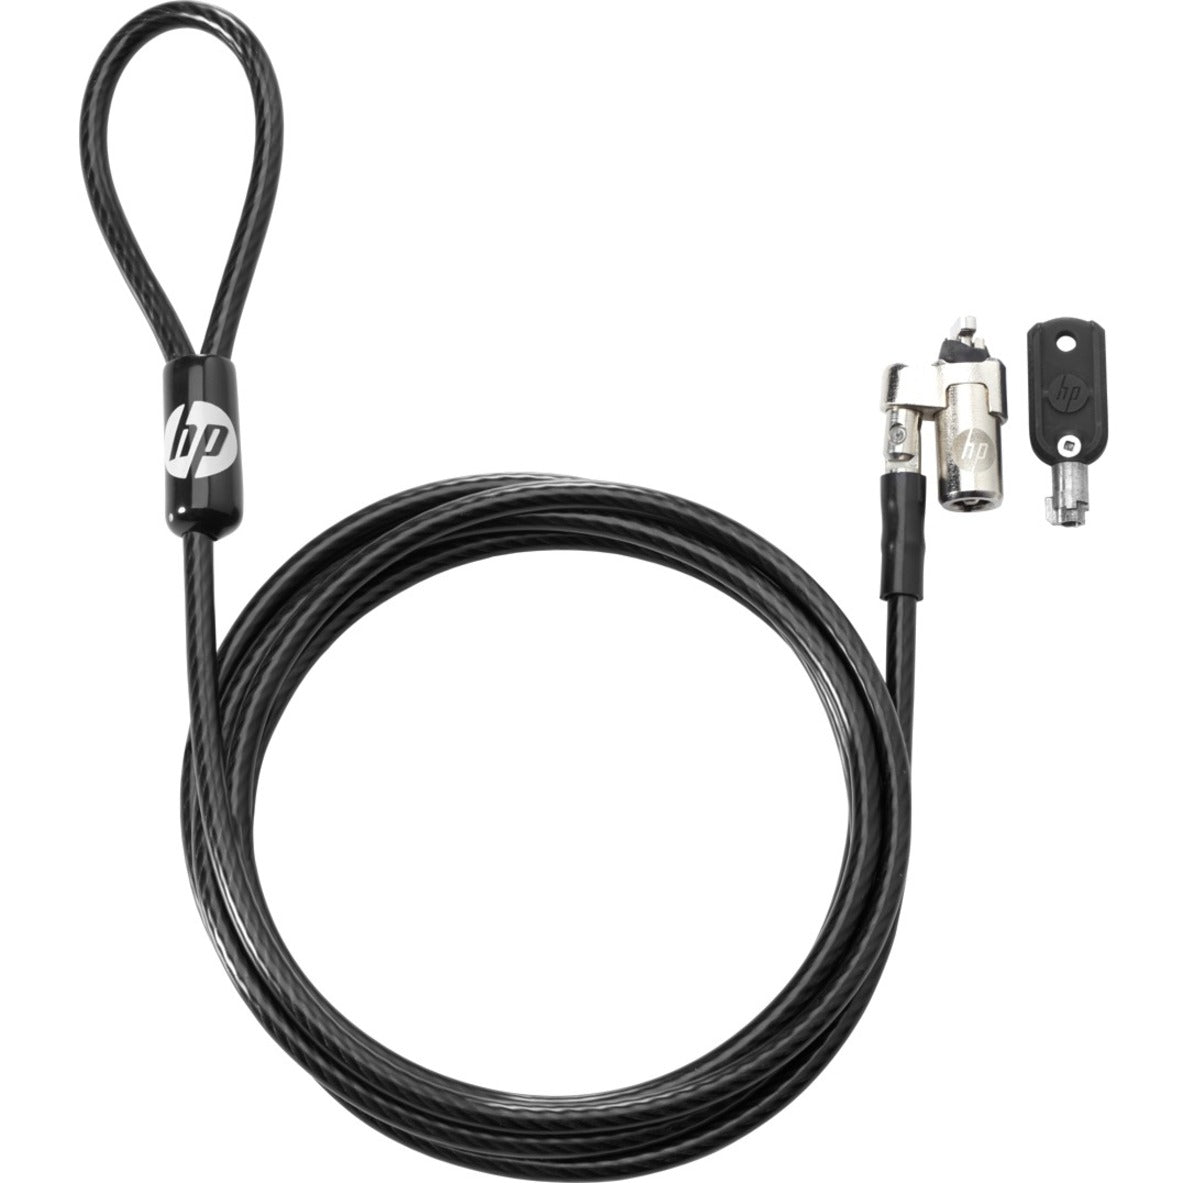 HP T1A62AA Keyed Cable Lock 10mm, 6 ft Length, Secure Your Devices